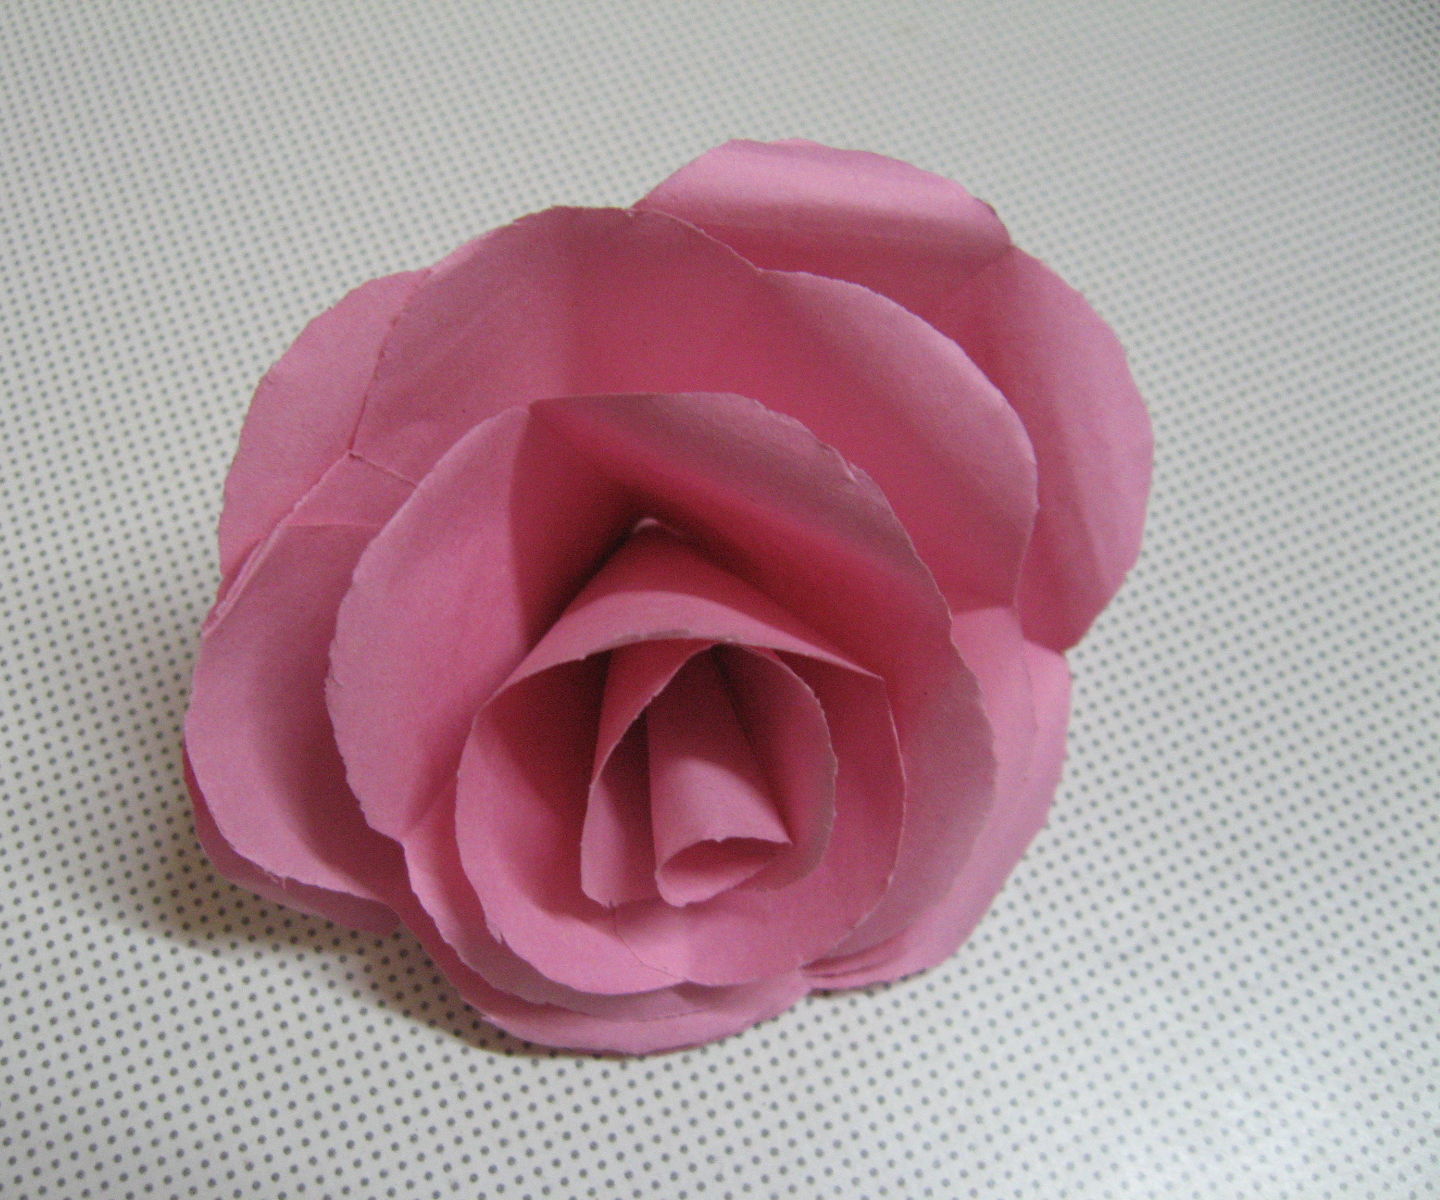 How to Make Real looking Paper Roses